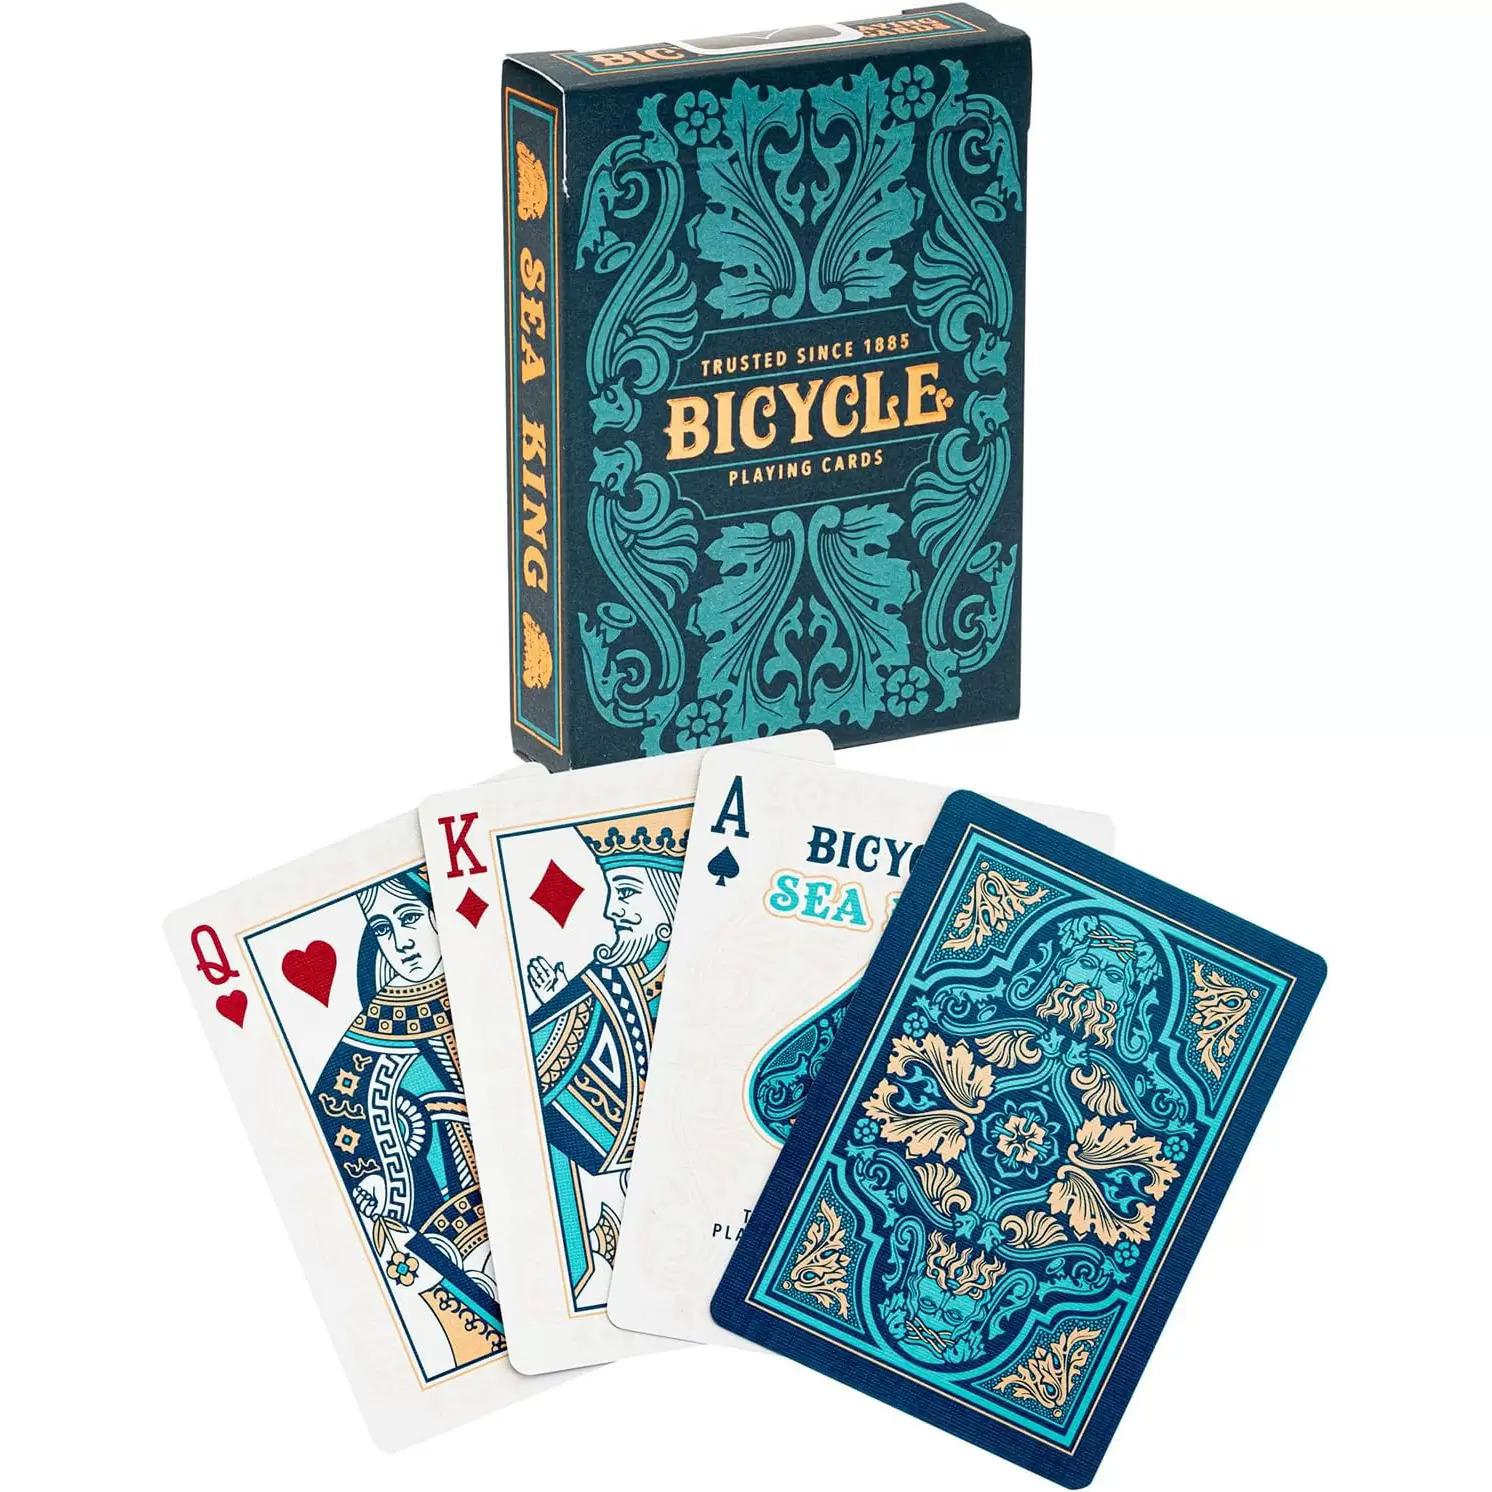 Bicycle Sea King Premium Playing Cards for $1.79